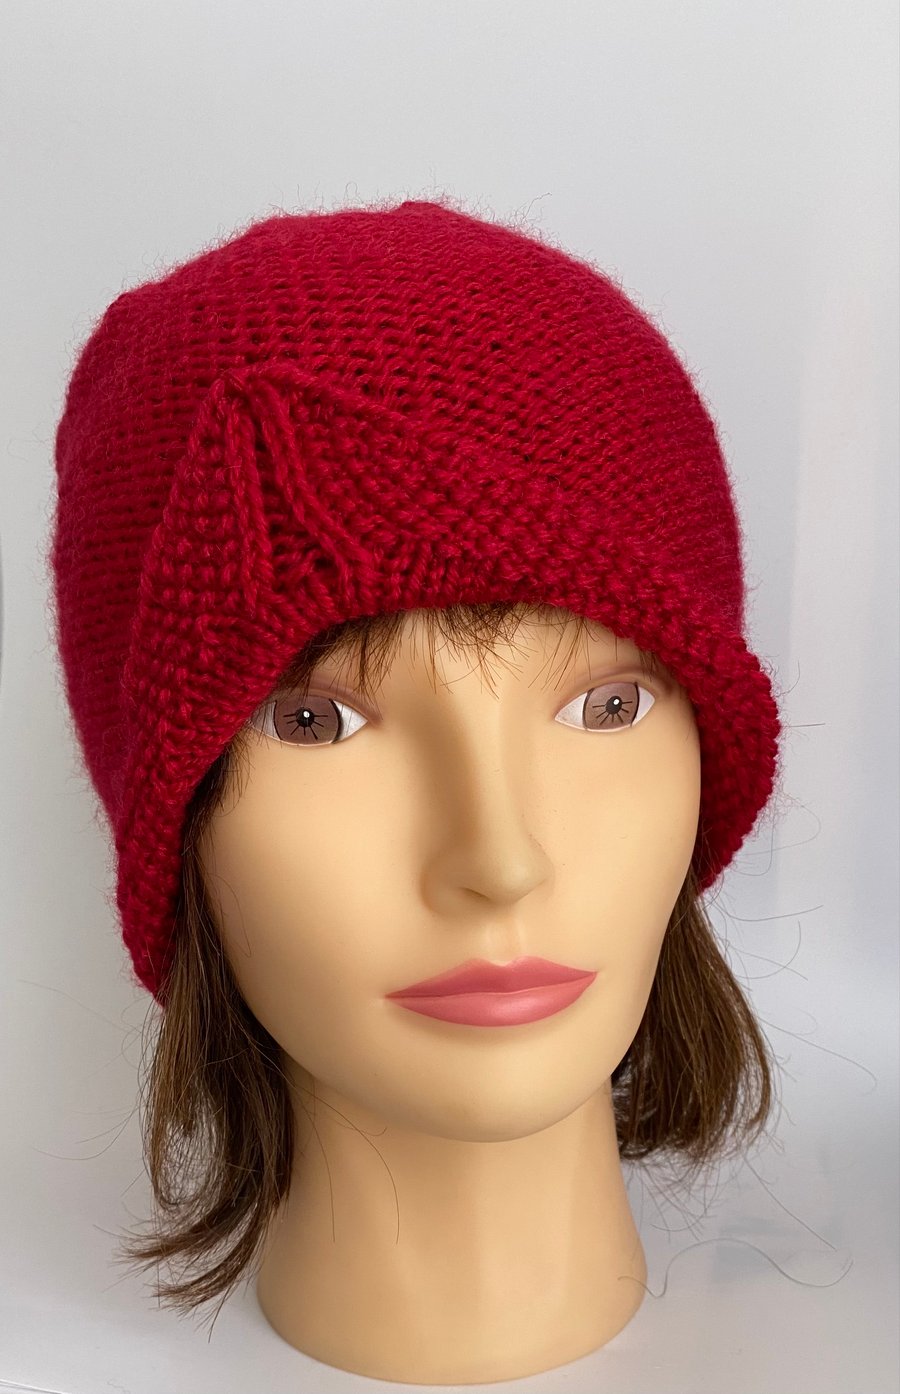 Red Hand Knitted Turban Style 1940s Hat Women's Stylish Skull Cap